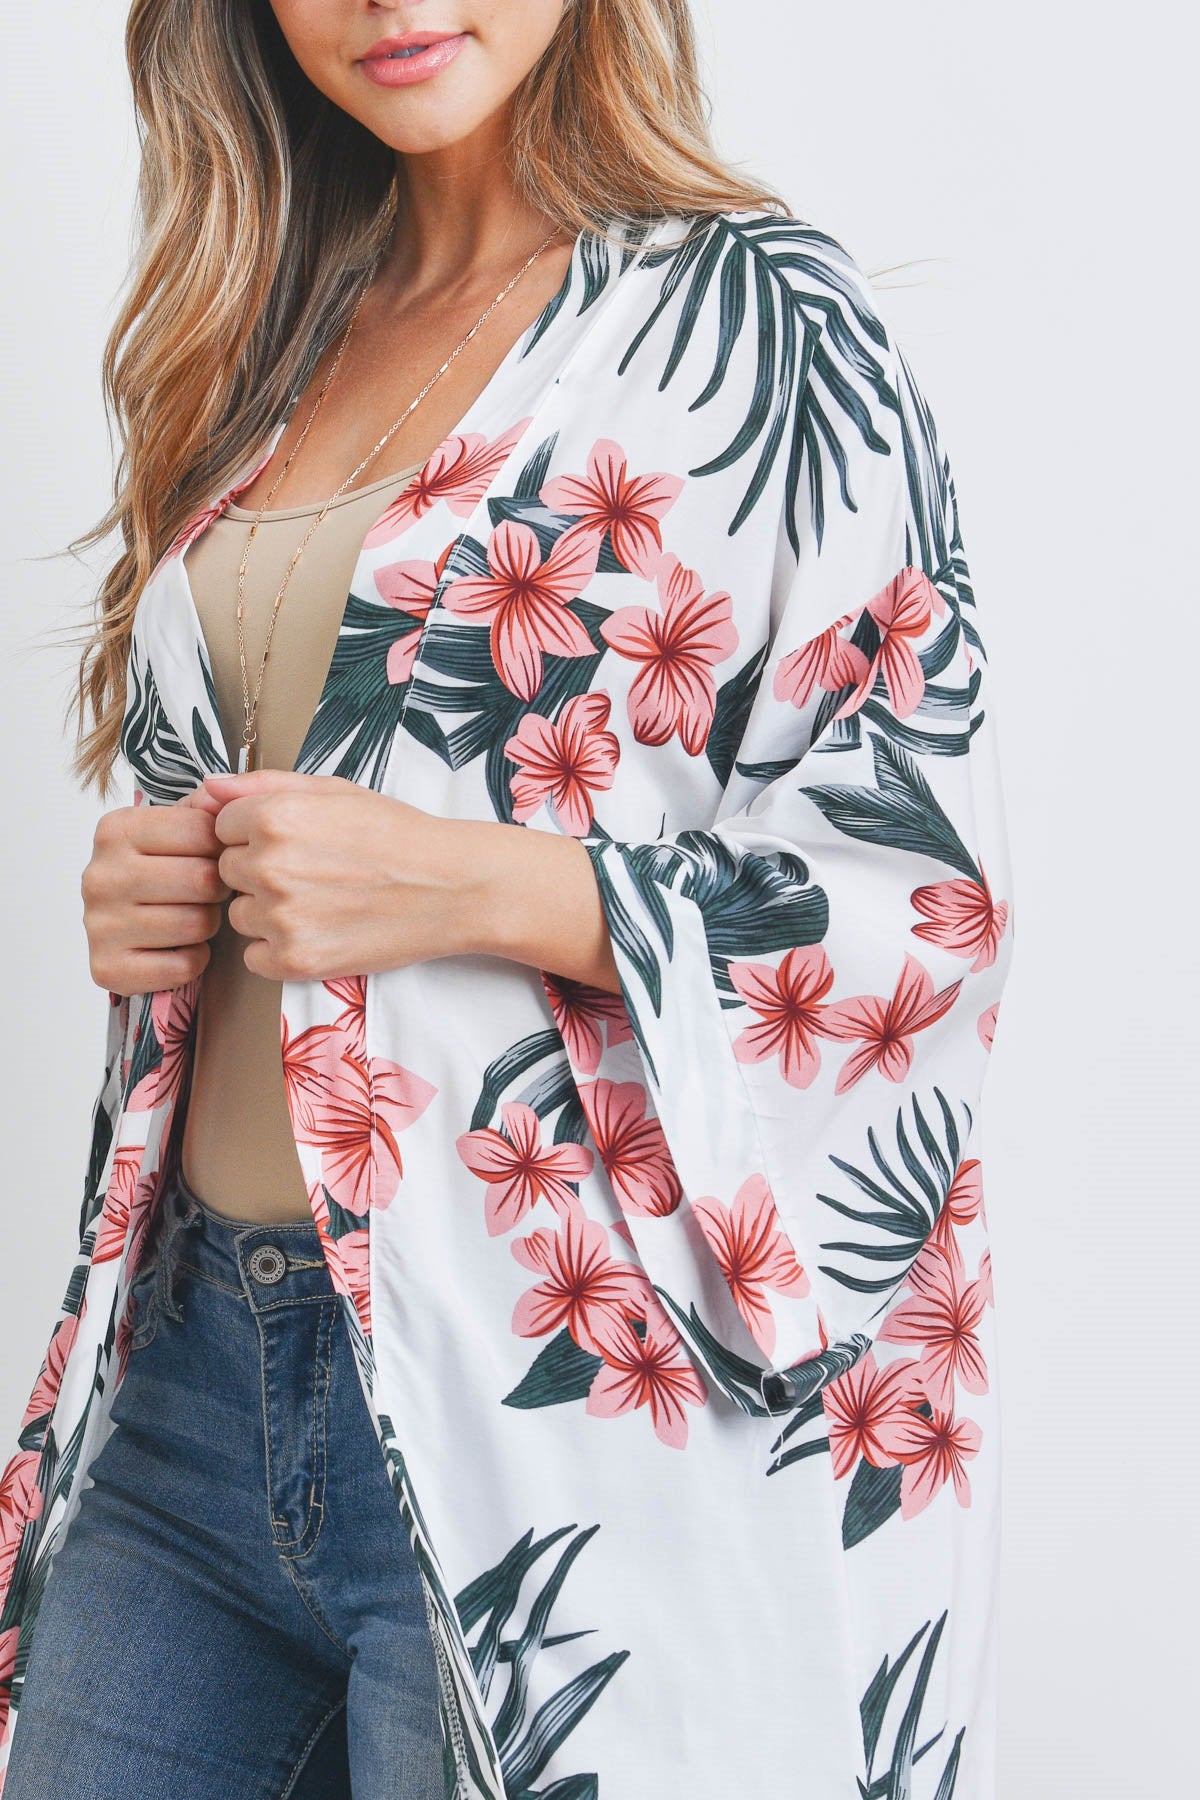 FLORAL PRINT OPEN FRONT KIMONO (NOW $4.25 ONLY!)